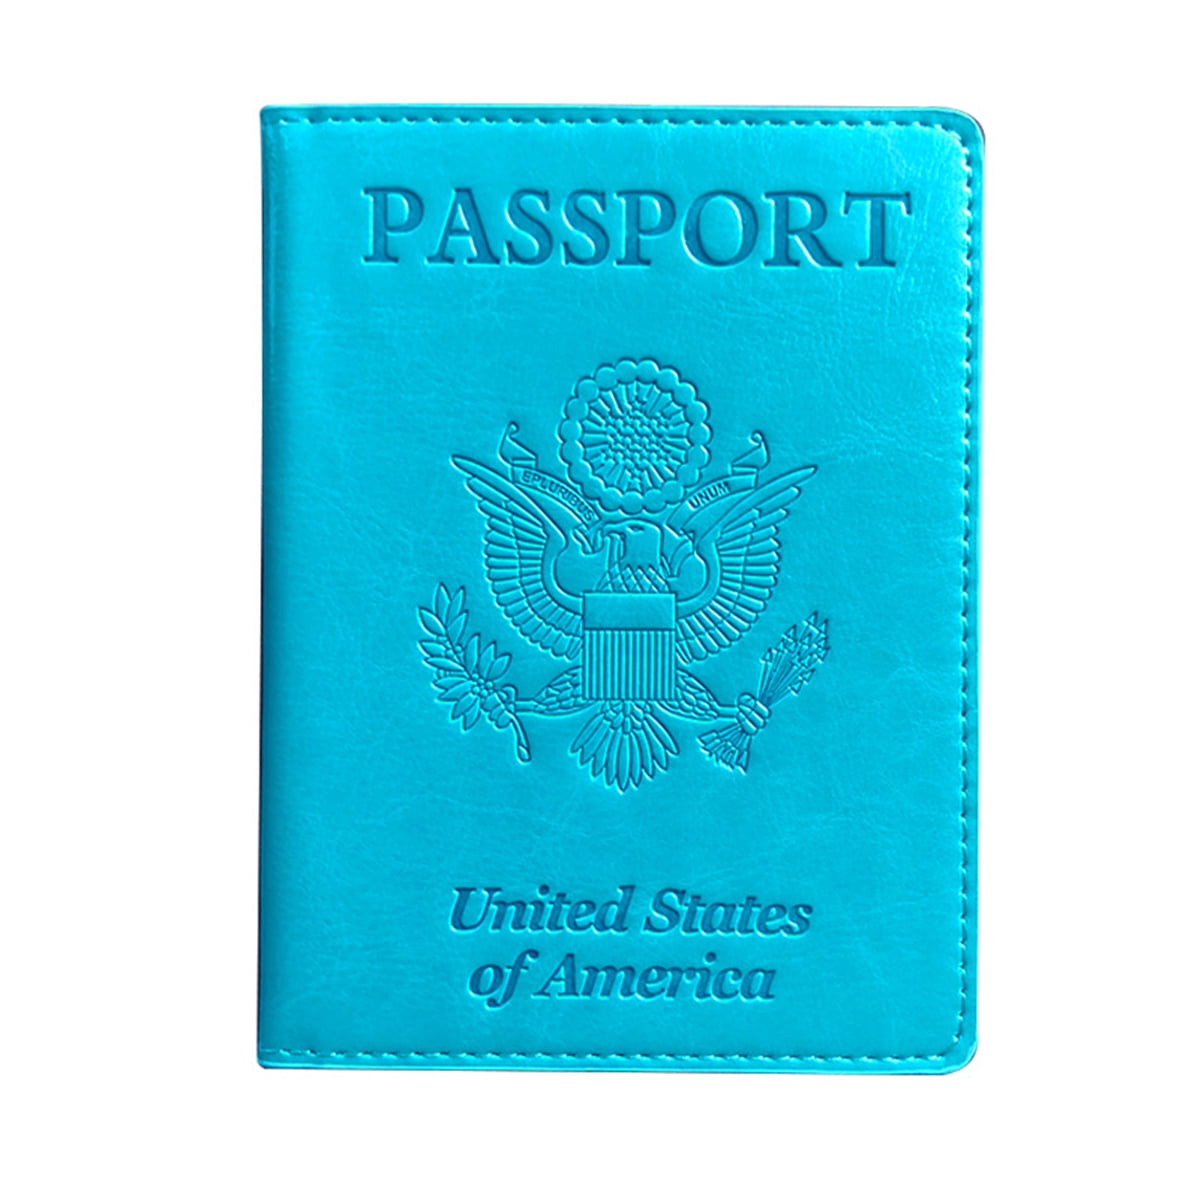 Passport and Vaccine Card Holder Combo PU Leather Passport Holder Portable Passport Case Passport Holder with Vaccine Card Slot for School Bussiness Trip Travel and Go Abroad